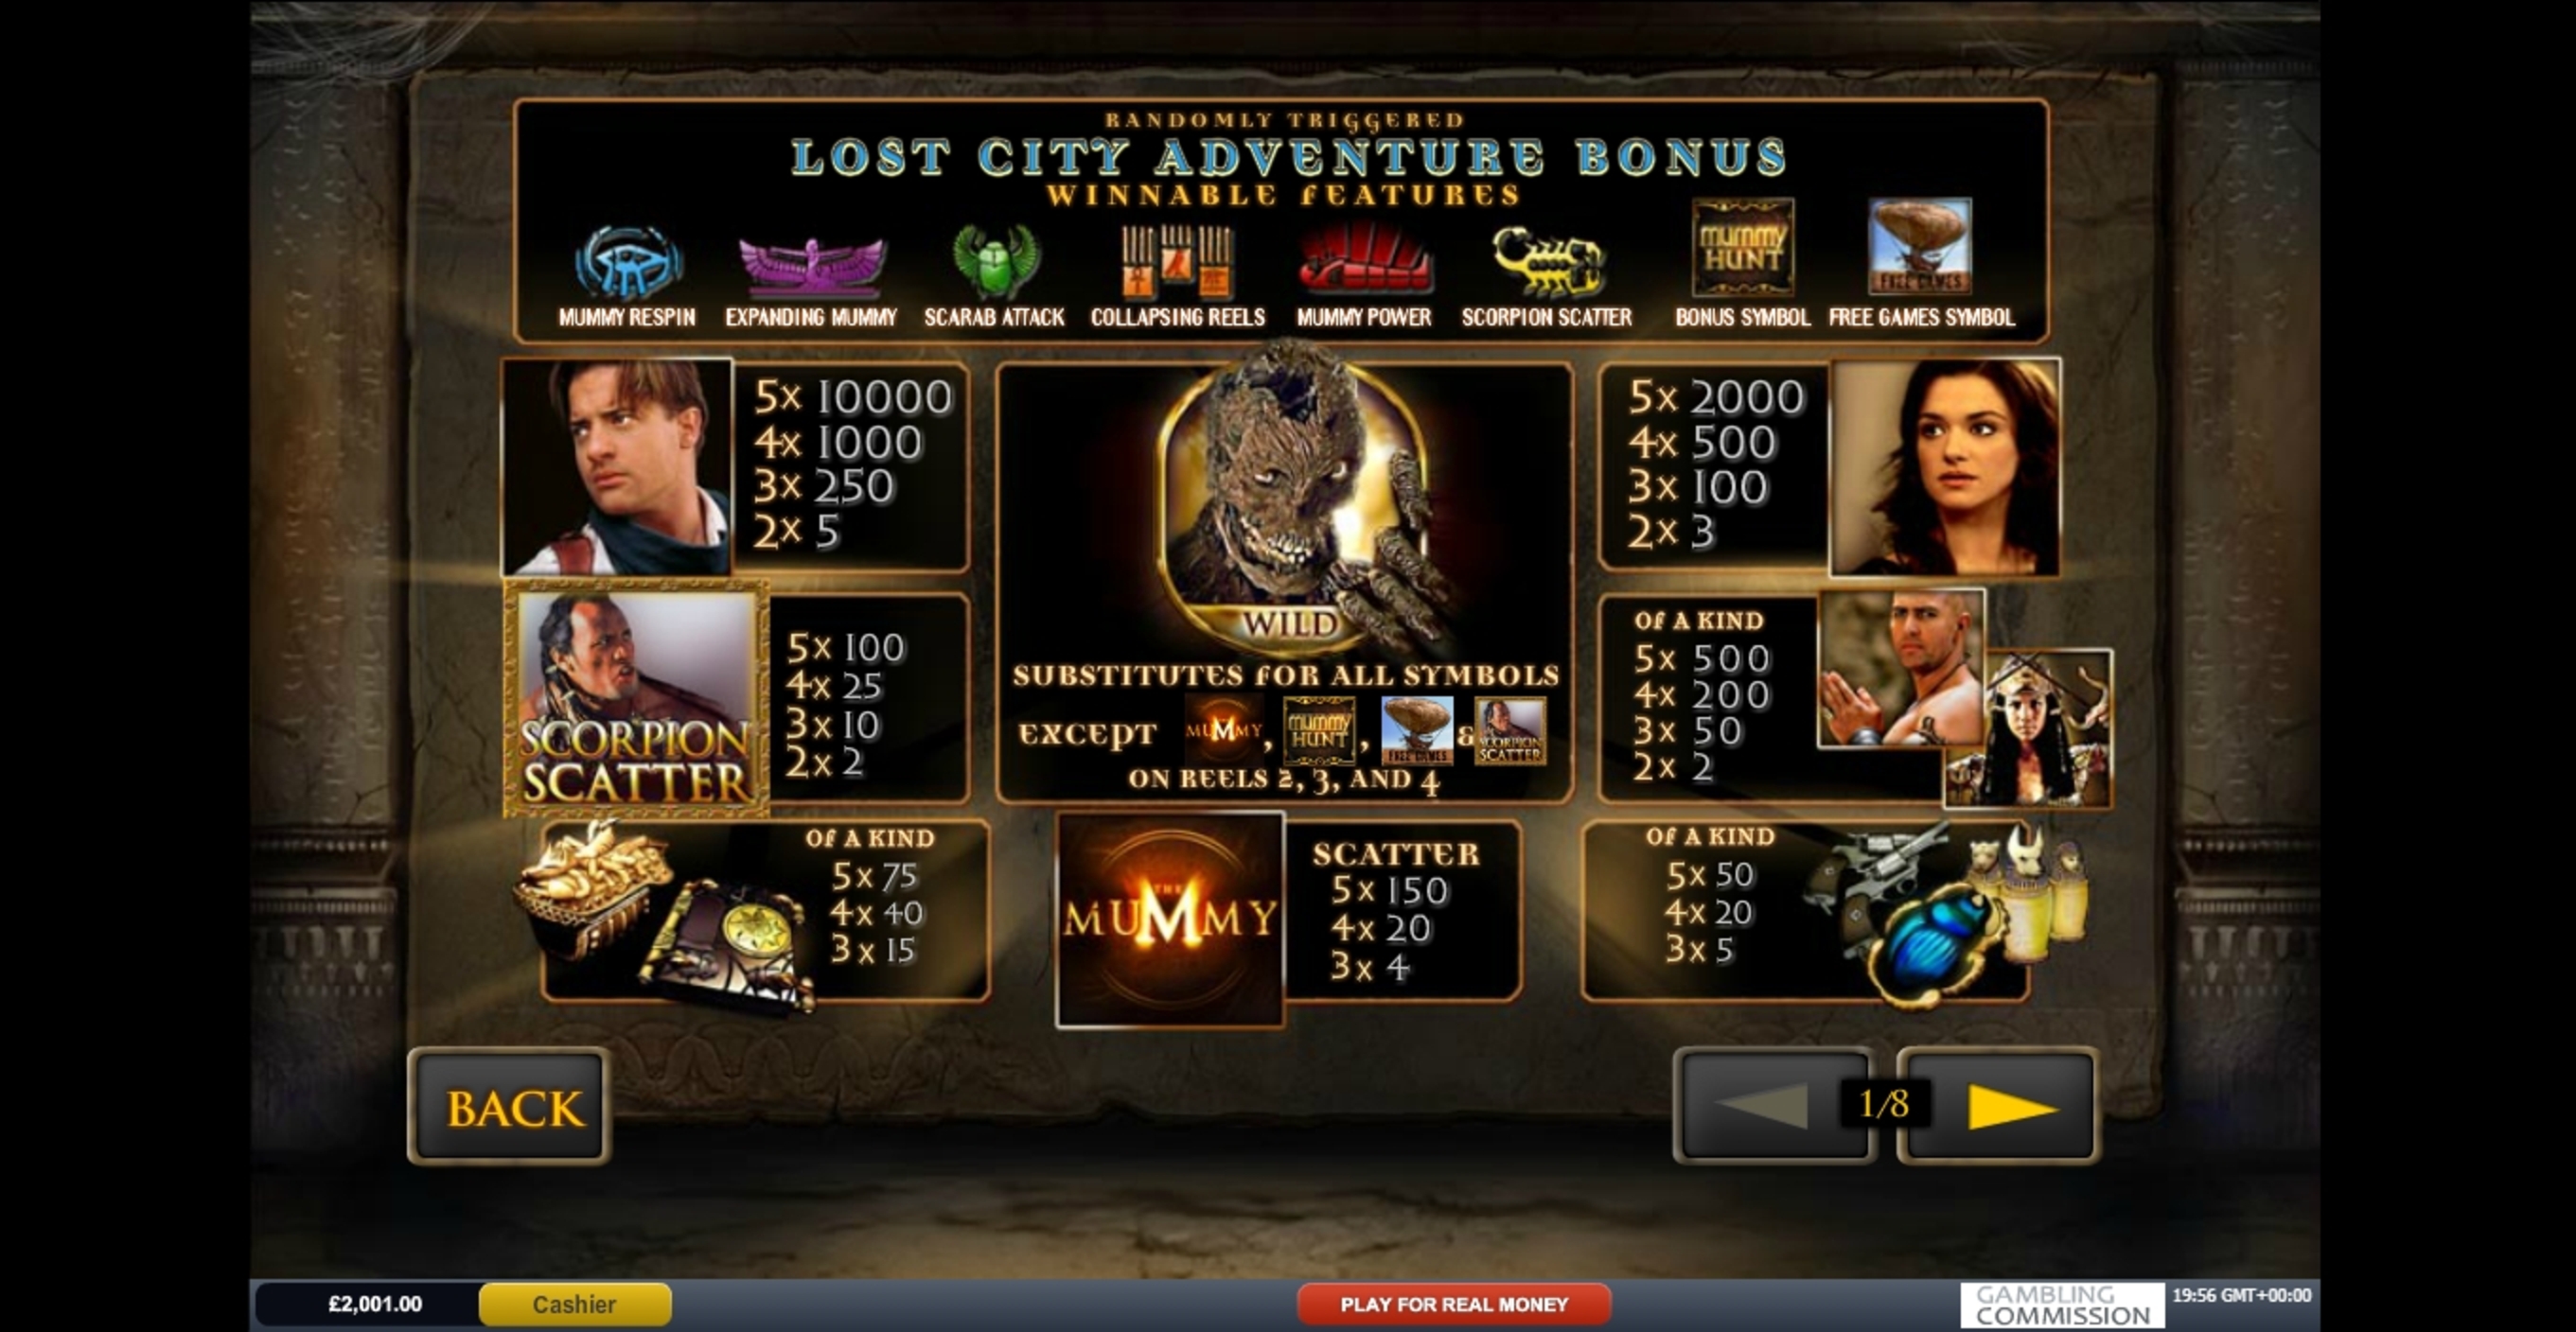 Info of The Mummy Slot Game by Playtech